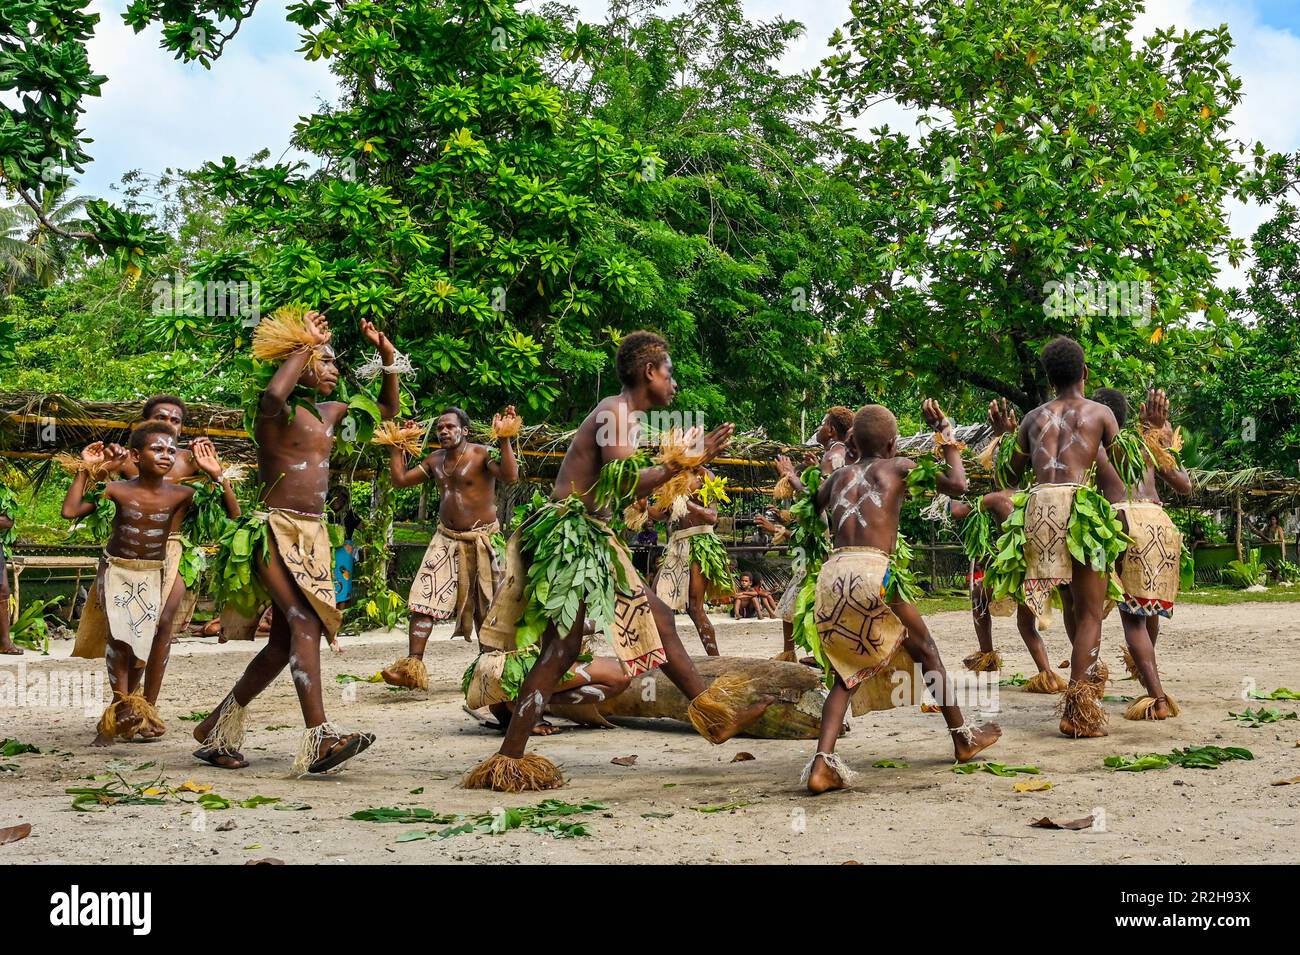 The Solomon Islands are home to diverse indigenous cultures, each with their own unique dance traditions. Lau-speaking people, who primarily inhabit Santa Ana Island, may have their own traditional dances. These dances could involve graceful movements, storytelling, and cultural expressions unique to their community. Stock Photo